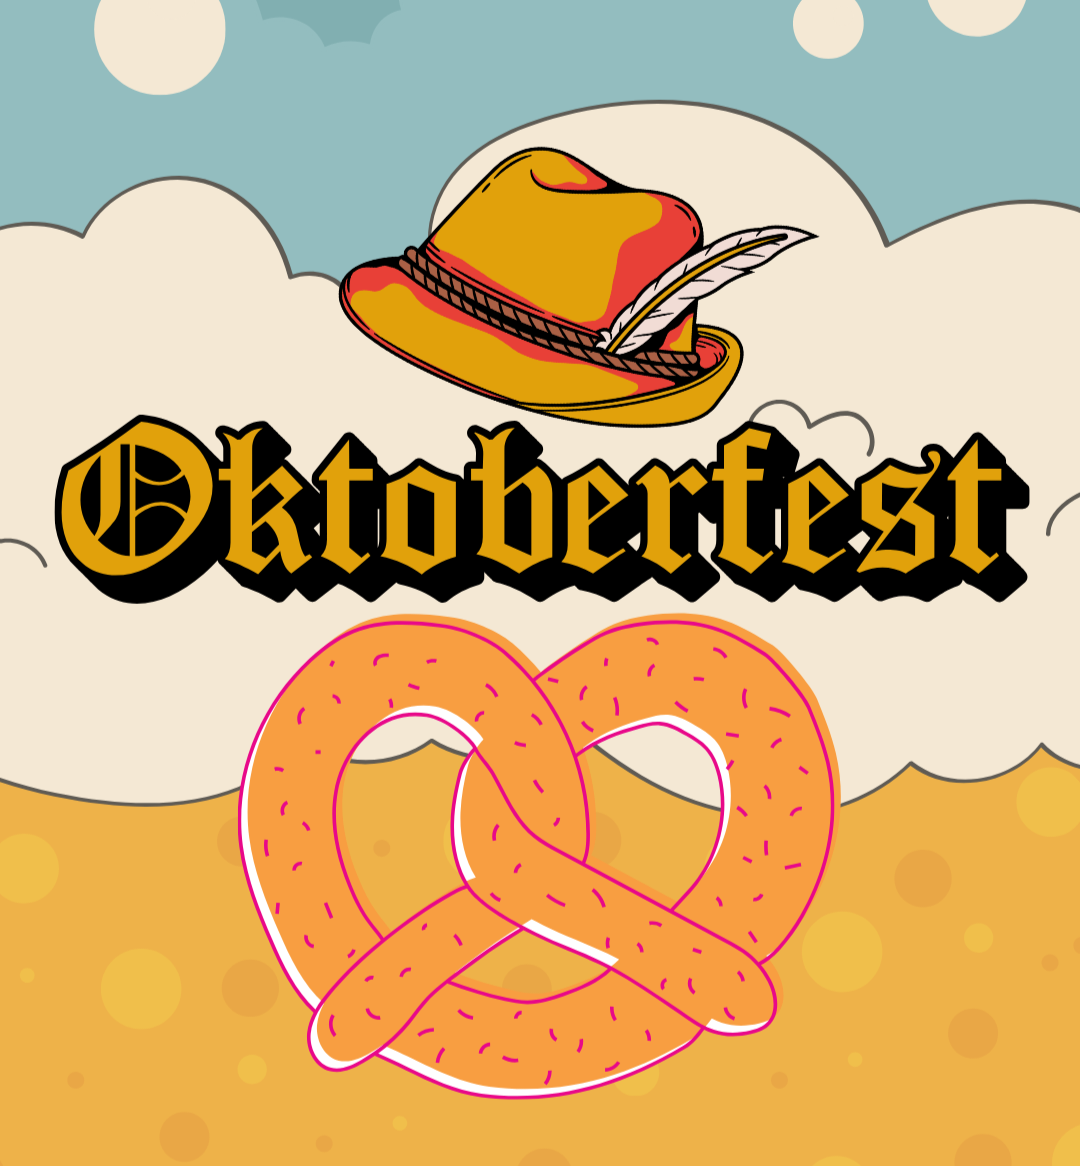 West Liberty University Hosts “Oktoberfest” for Students and Faculty